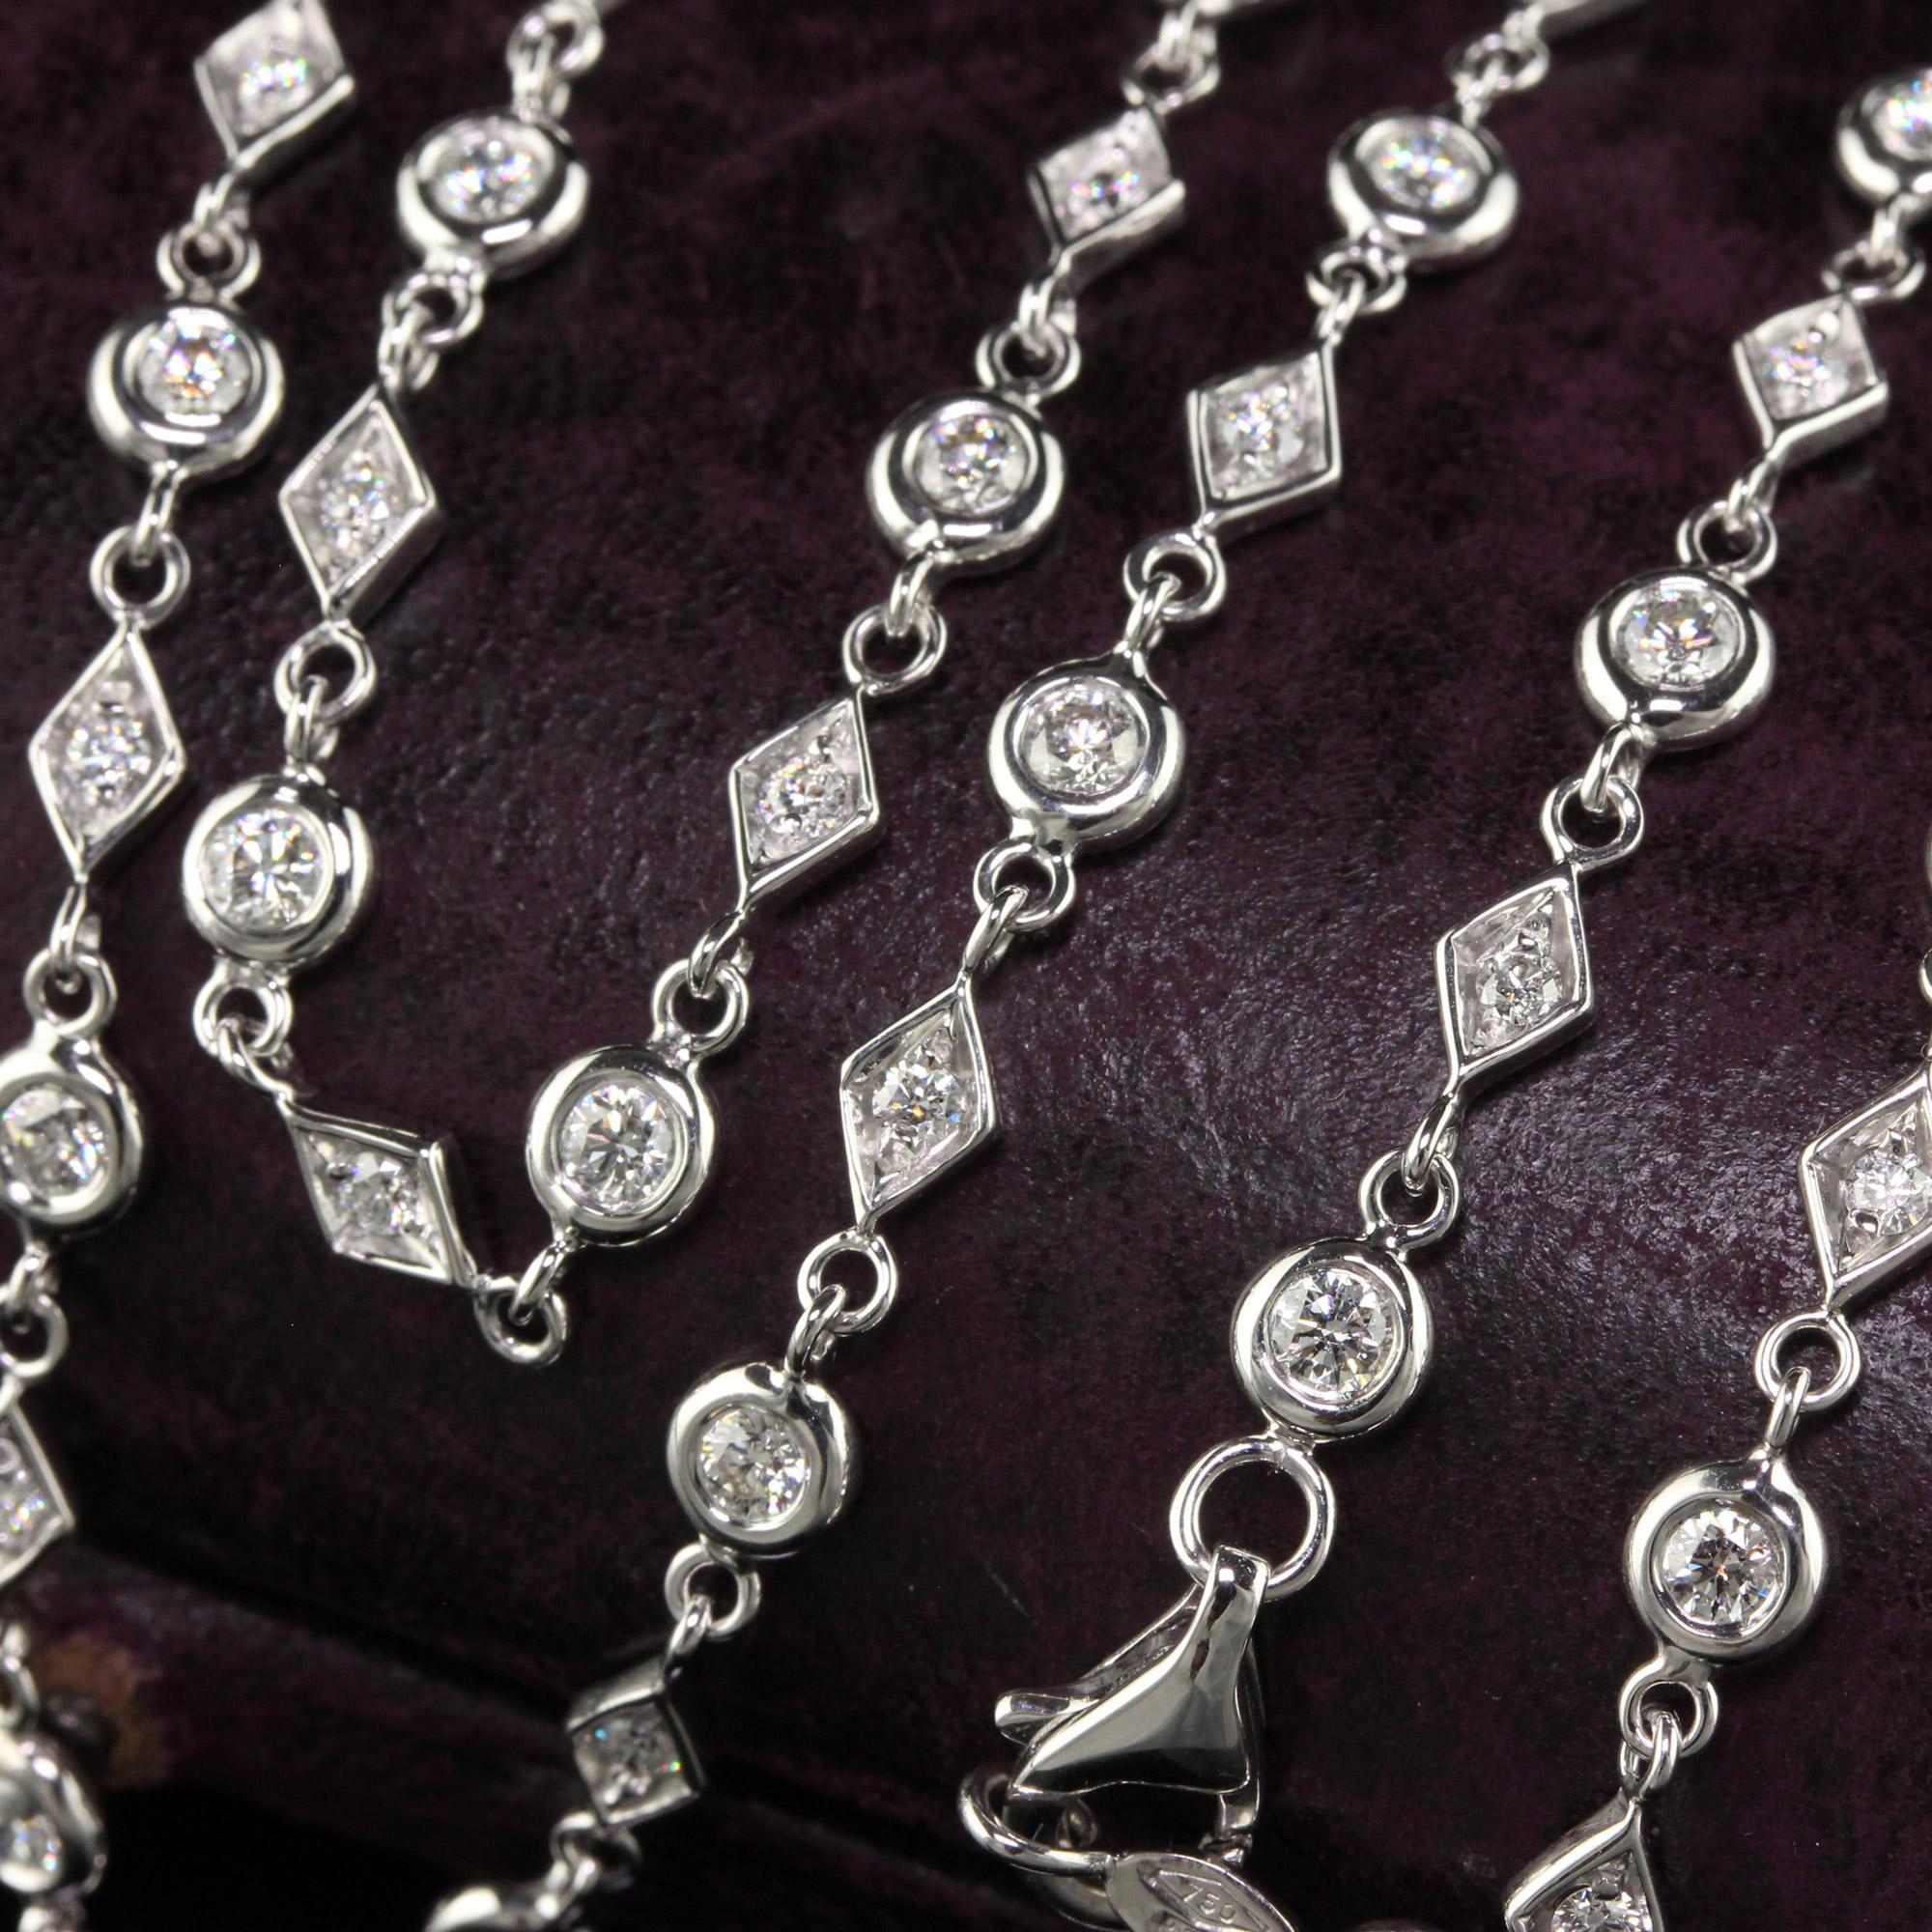 Round Cut Estate 18K White Gold Italian Diamond Chain By The Yard Necklace - 35 inches